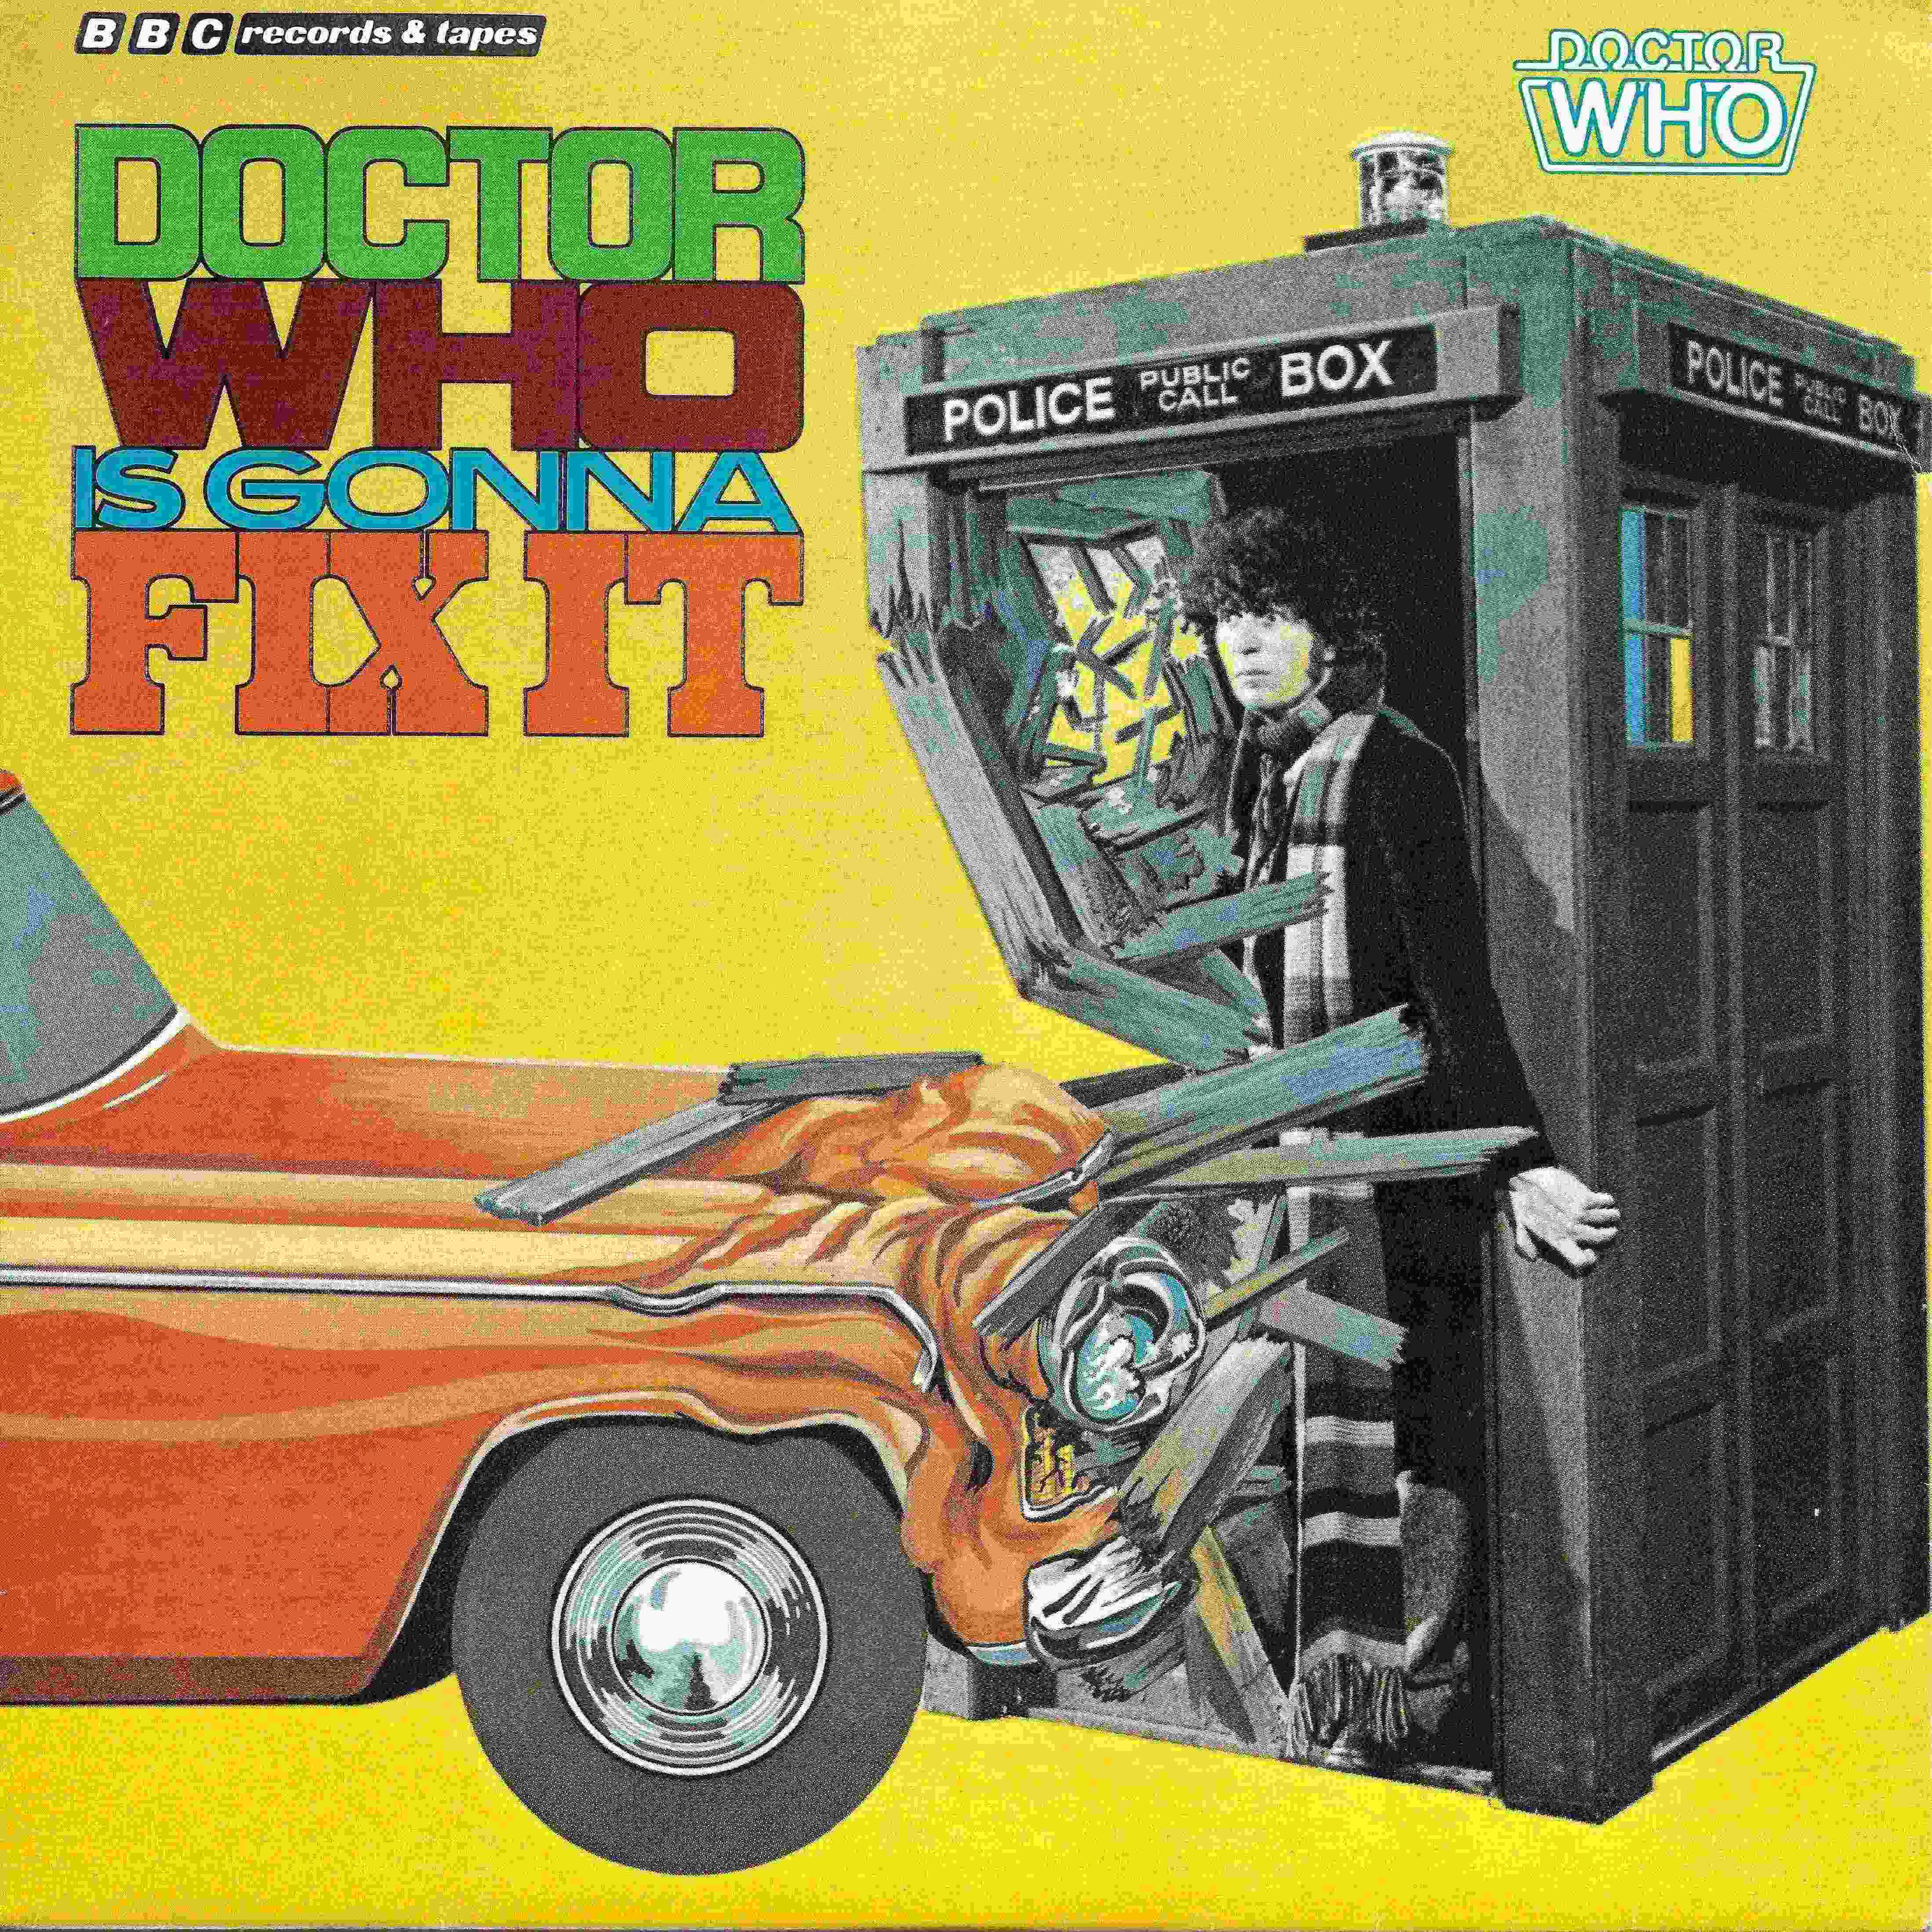 Picture of Doctor who is gonna fix it by artist Bullamakanka from the BBC singles - Records and Tapes library